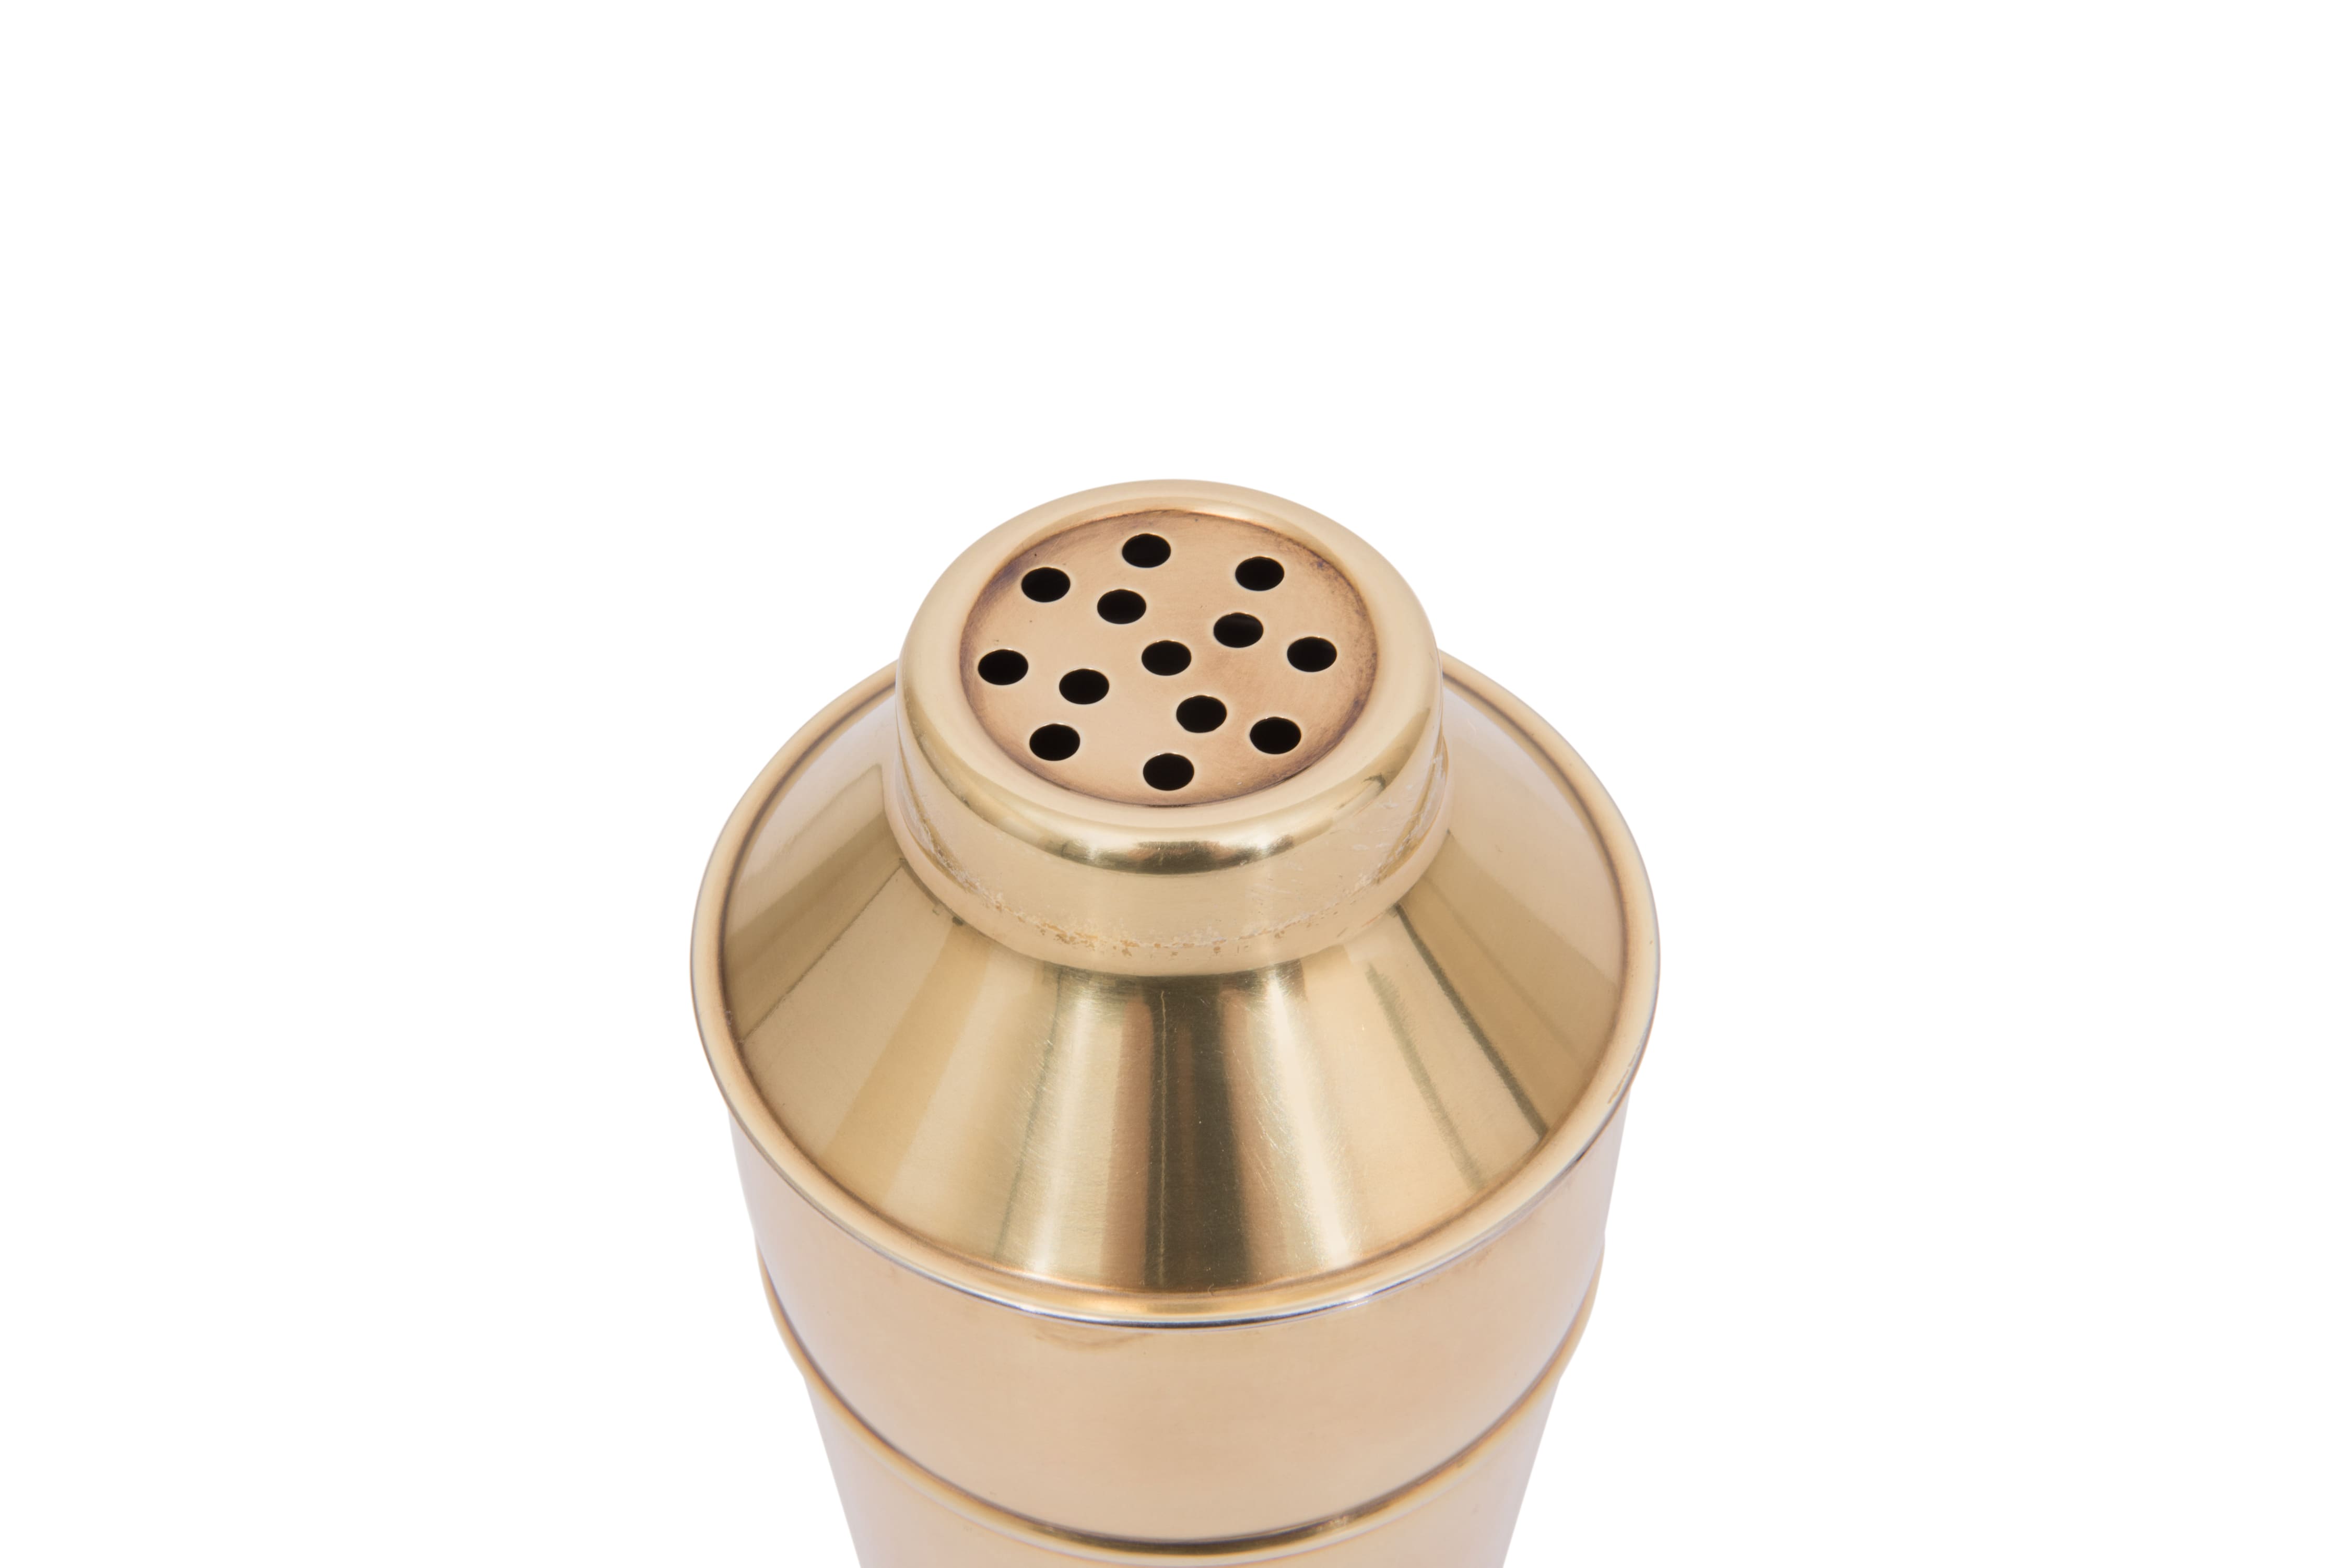 Gold Stainless Steel Cocktail Shaker